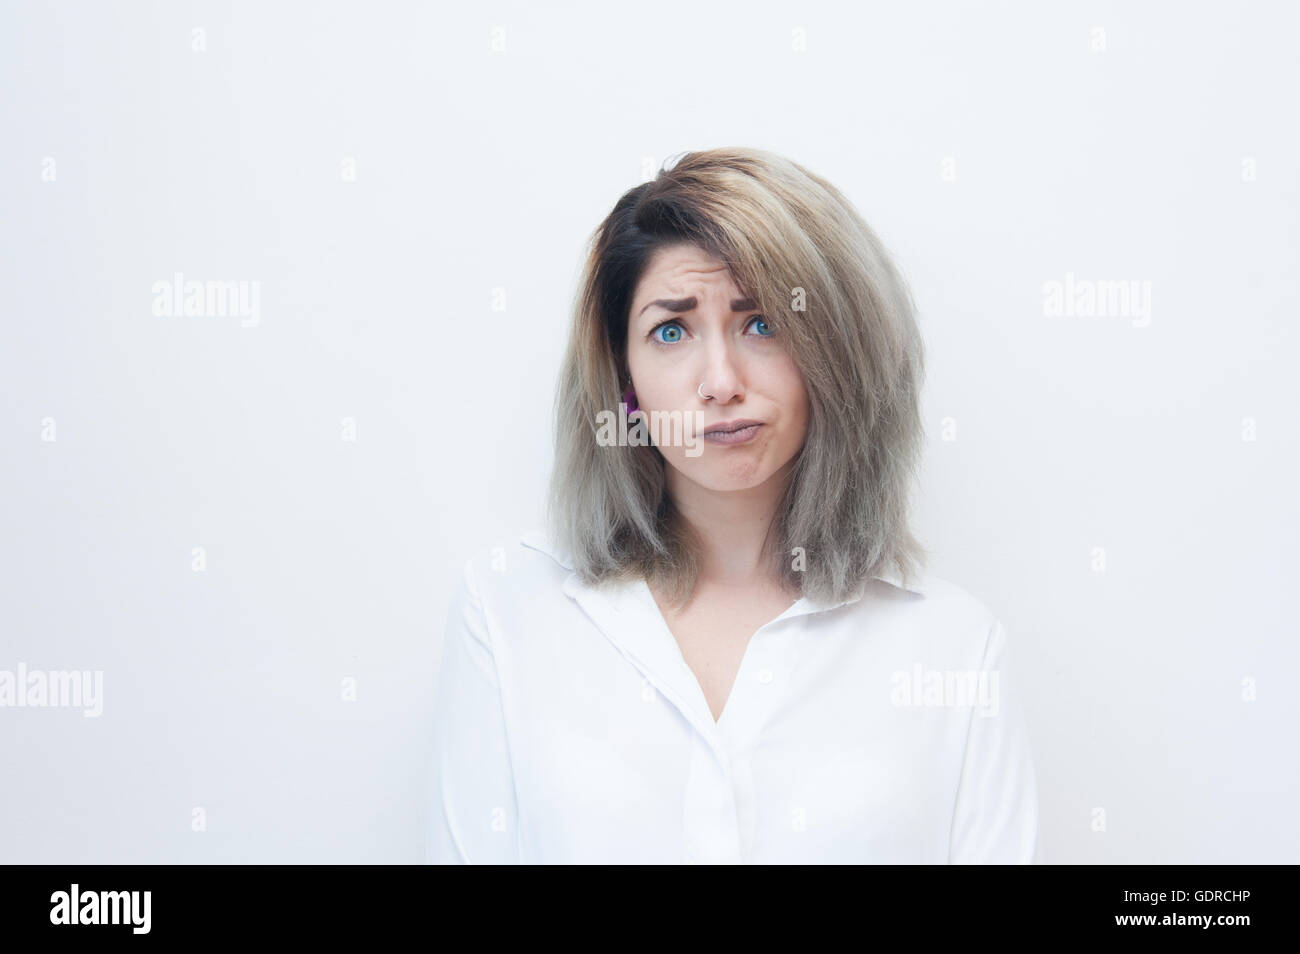 Young blue eyes blonde woman frustrated looking at camera on white background Stock Photo